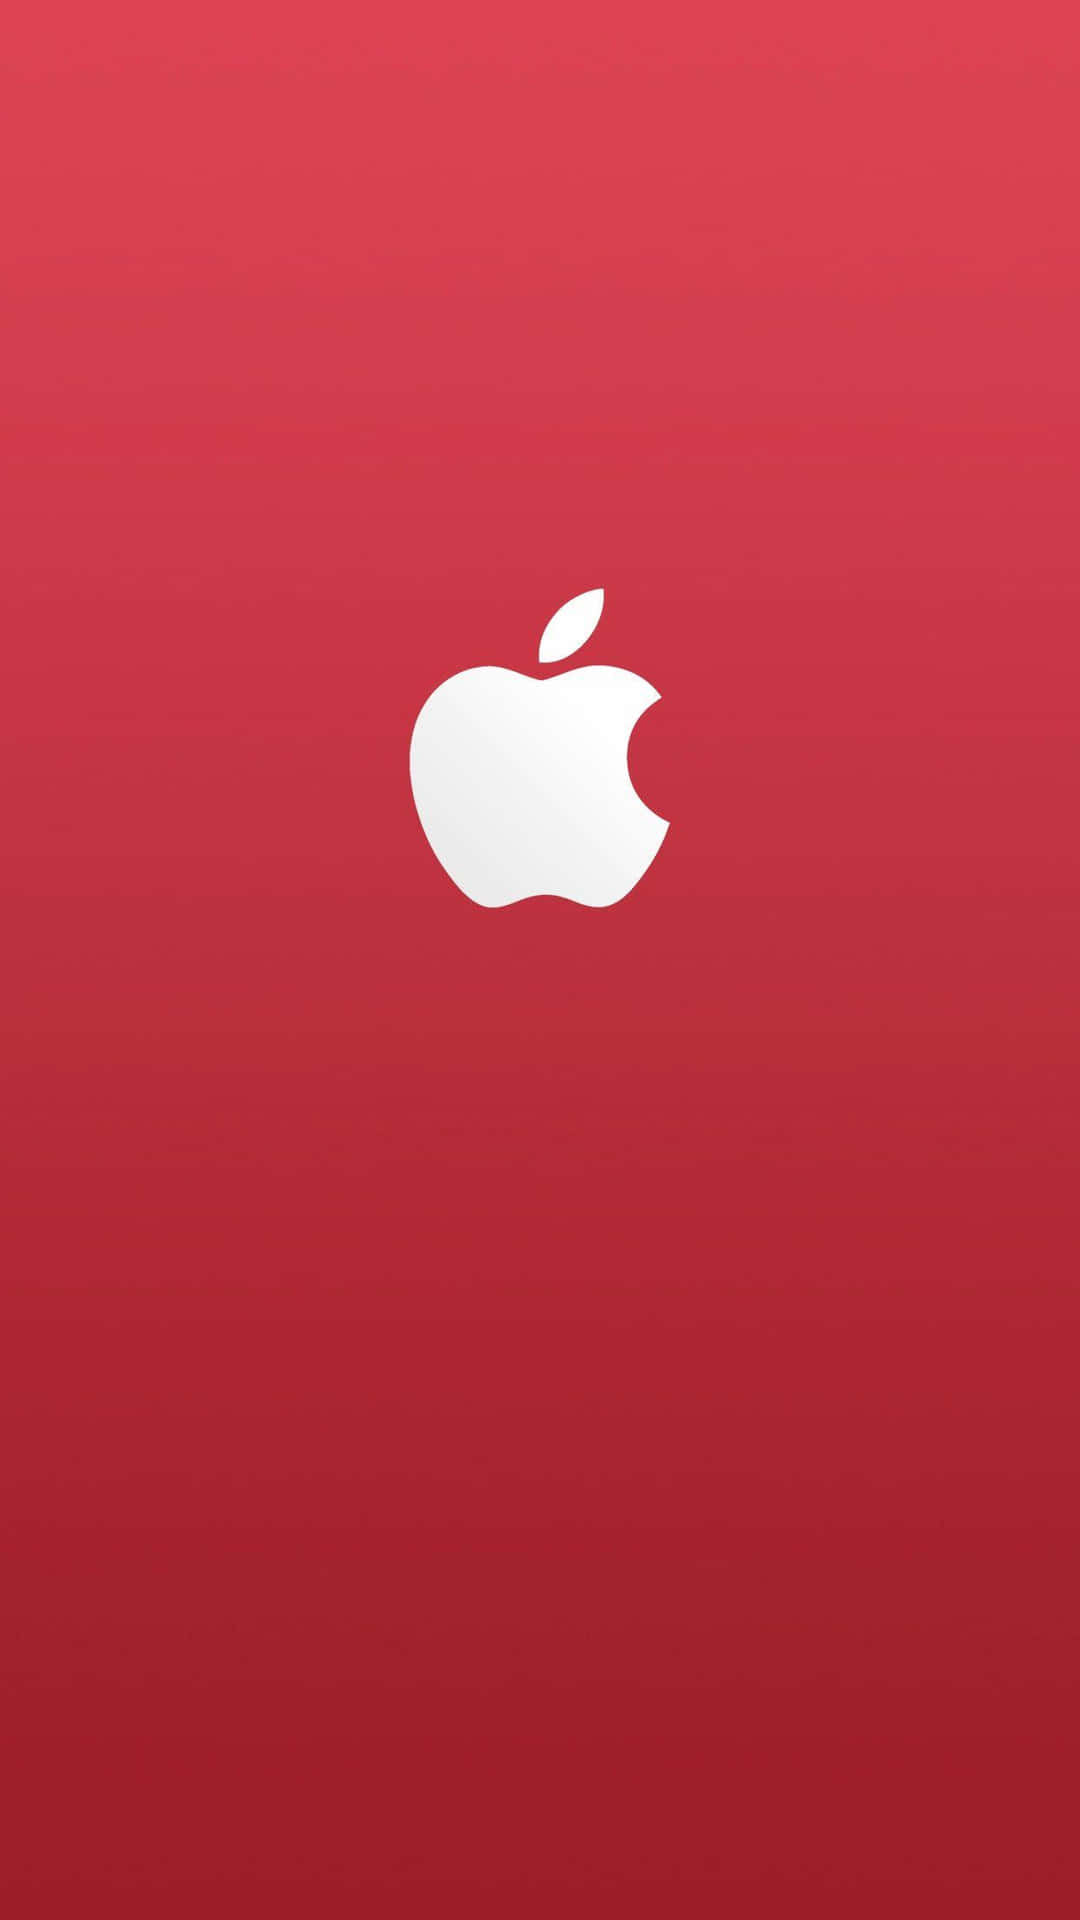 White Logo On Red Amazing Apple Hd Iphone